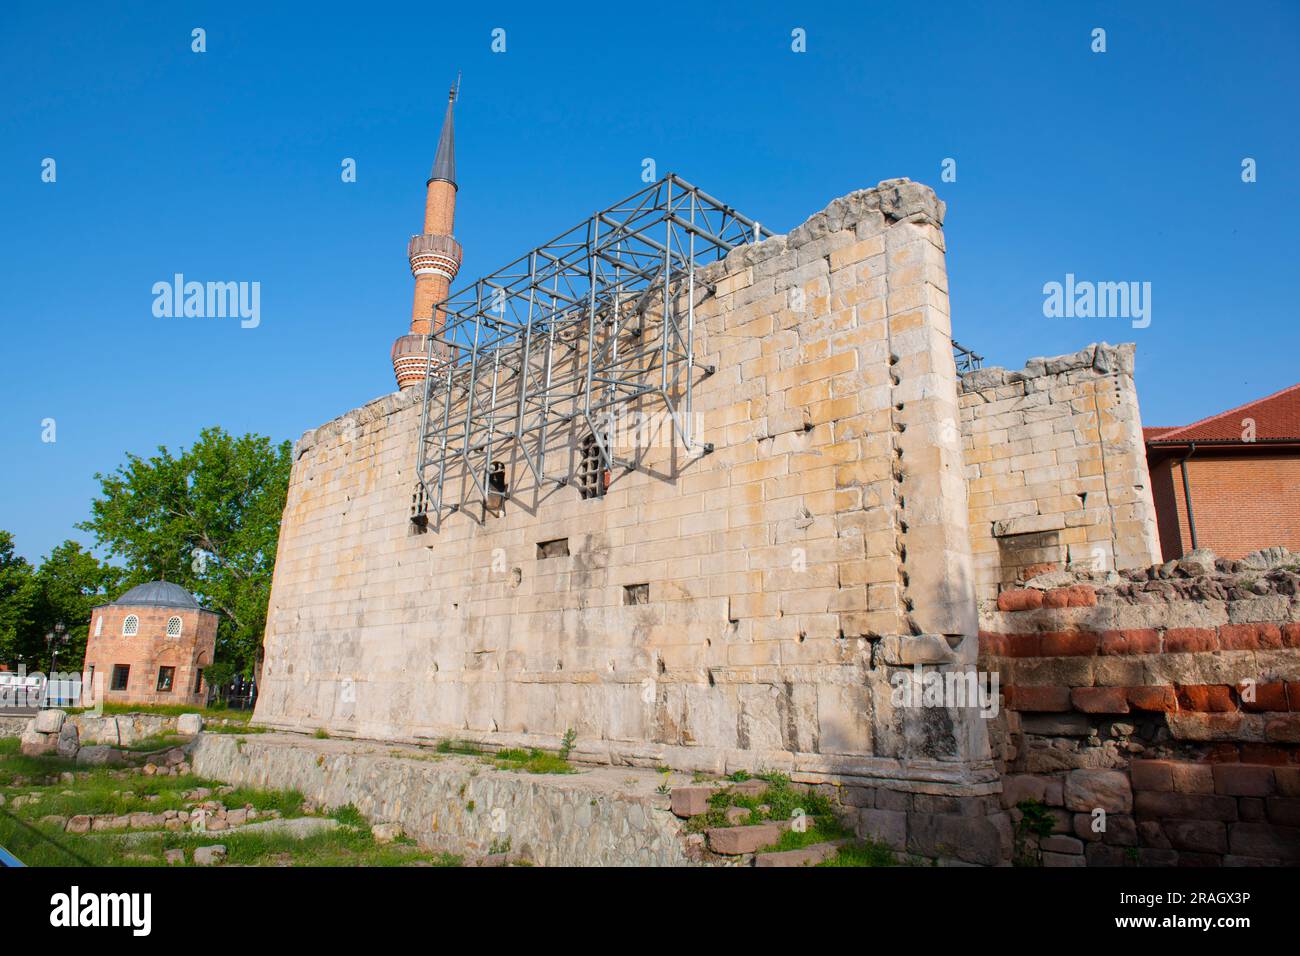 Temple of Augustus and Rome is a Rome ruin built in 20 AD in Altindag district in city of Ankara, Turkey. Stock Photo